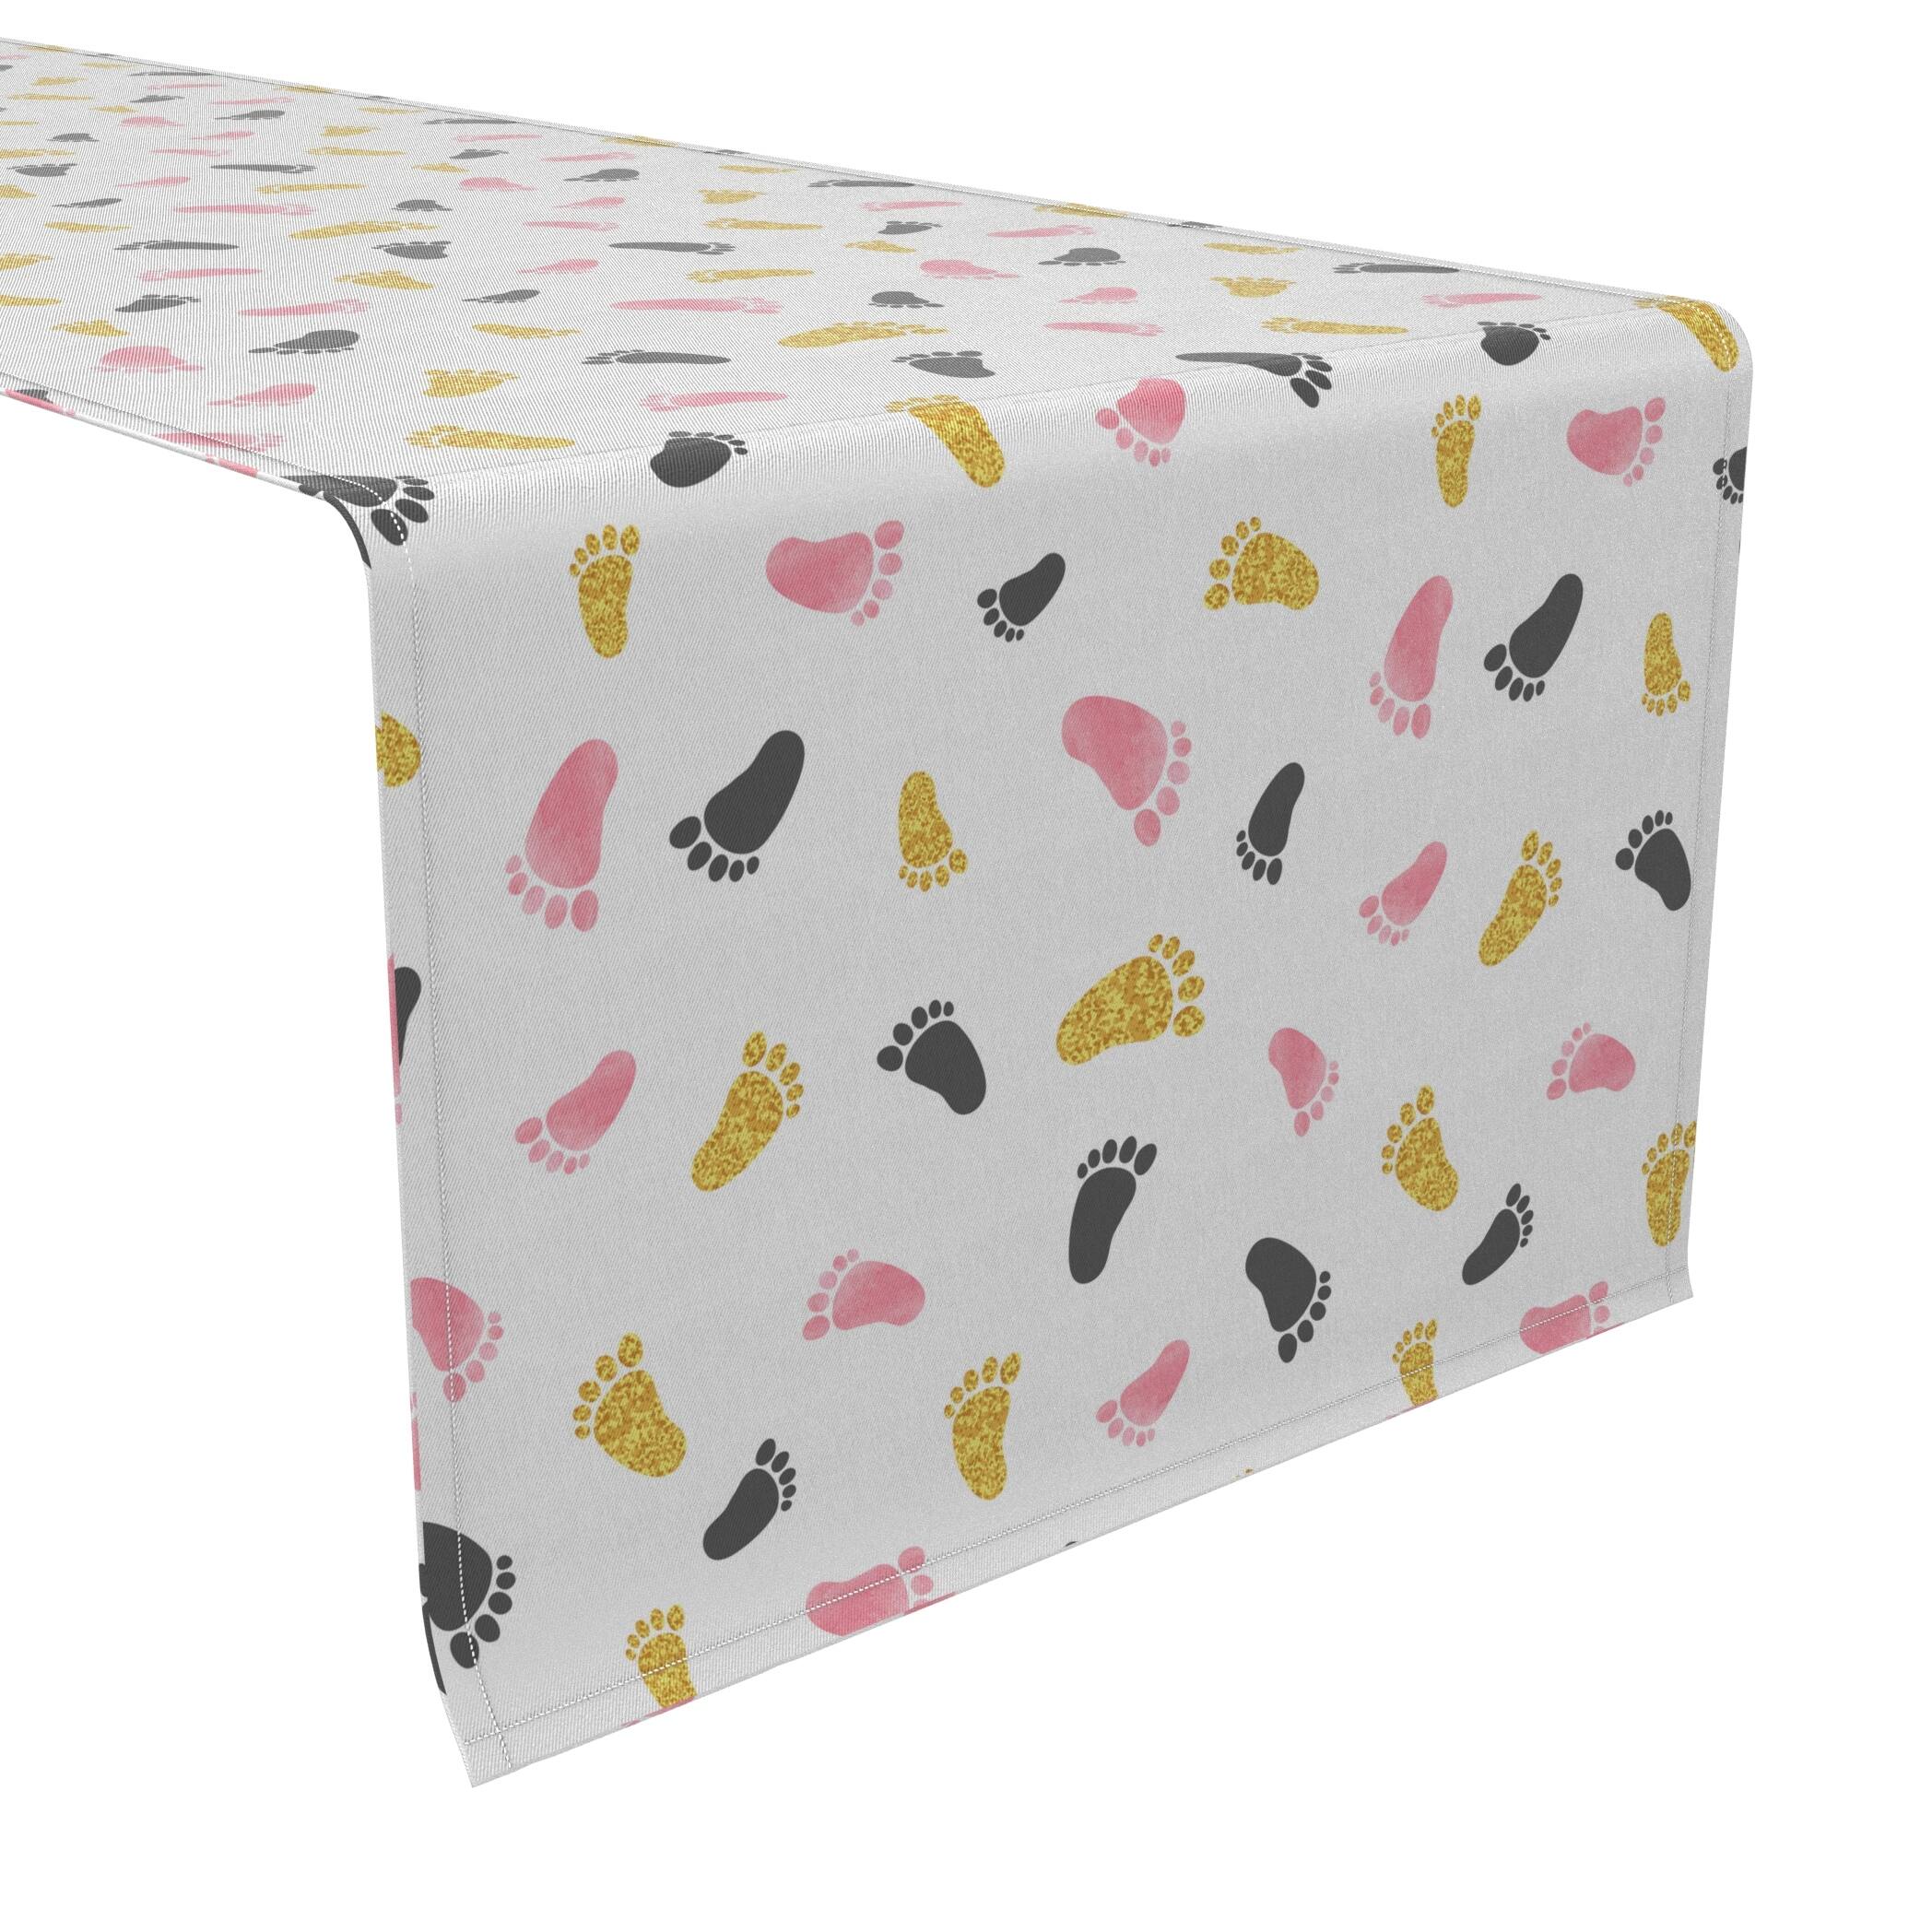 Fabric Textile Products, Inc. Table Runner, 100% Cotton, 16x108", Pink and Gold Baby Foot Prints